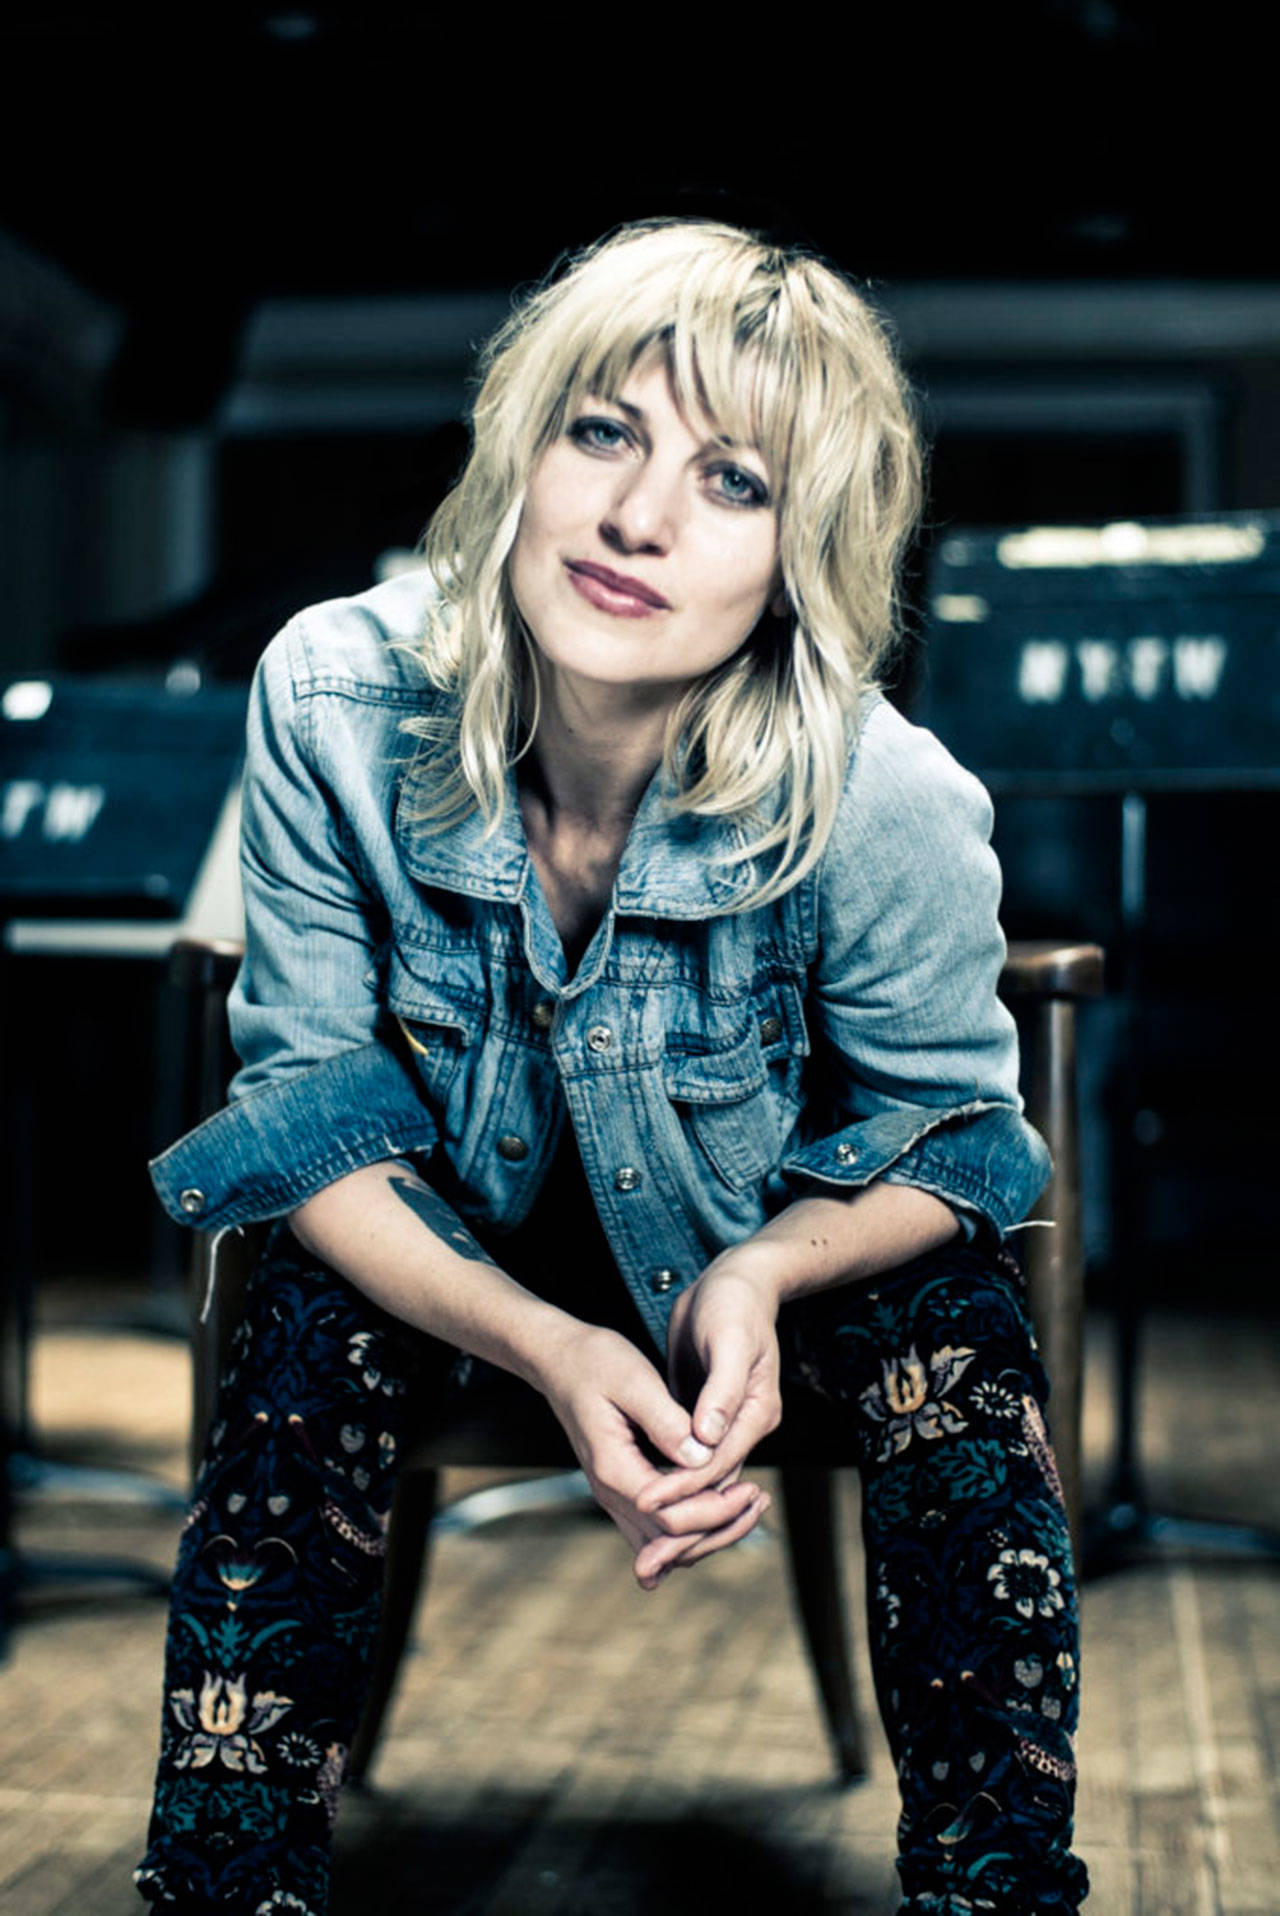 Photo courtesy of the Treehouse Café                                Singer/songwriter Anais Mitchell will take to the stage at the Treehouse Café at 8 p.m. Saturday, May 13 for a special 21-and-older concert event.